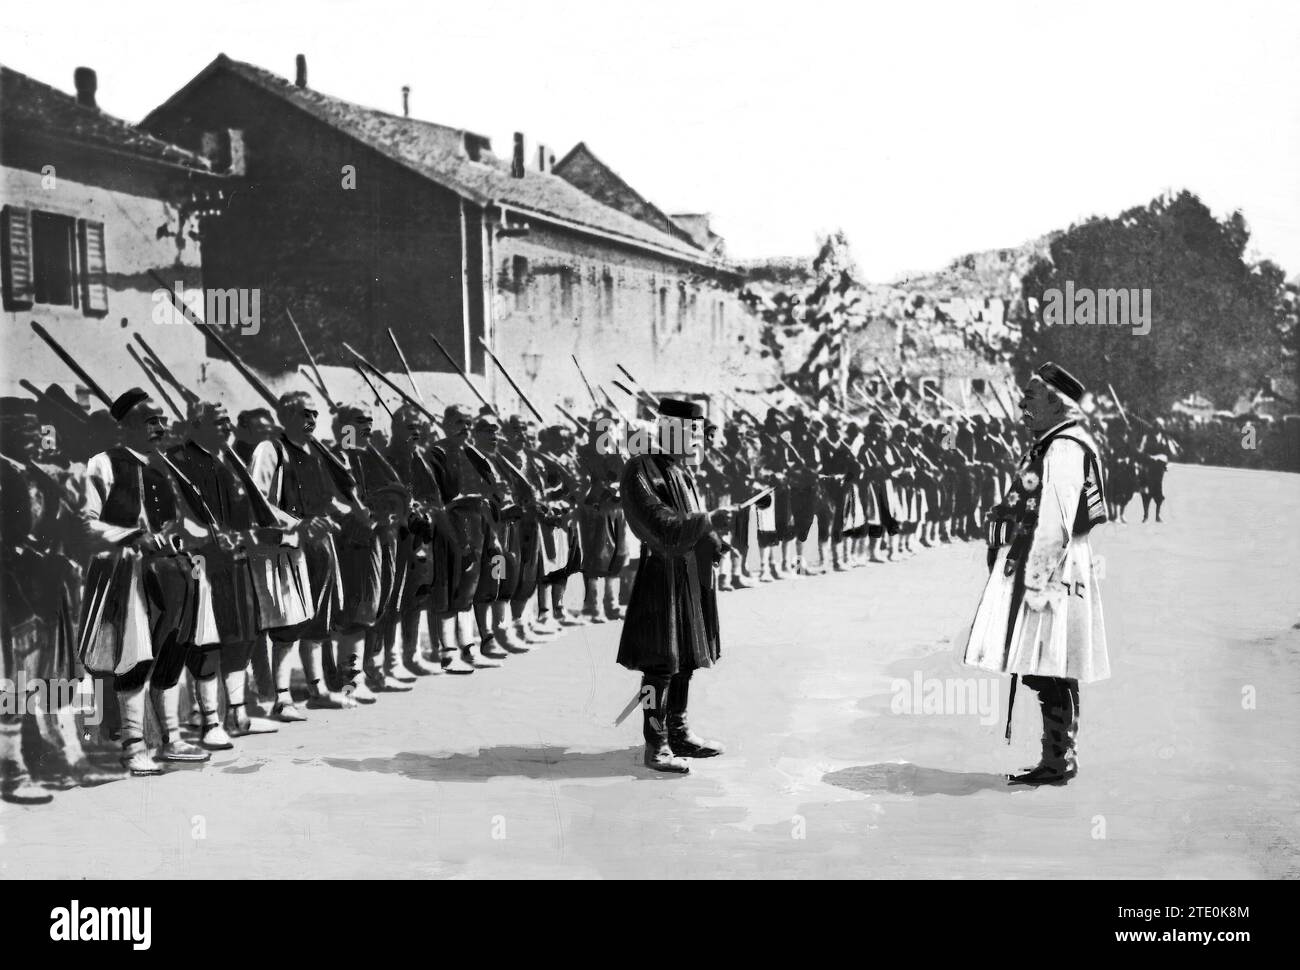 10/15/1912. Military Montenegro. The King of Montenegro and his Troops Listening to the reading of the declaration of War. Photo: London News. Credit: Album / Archivo ABC Stock Photo